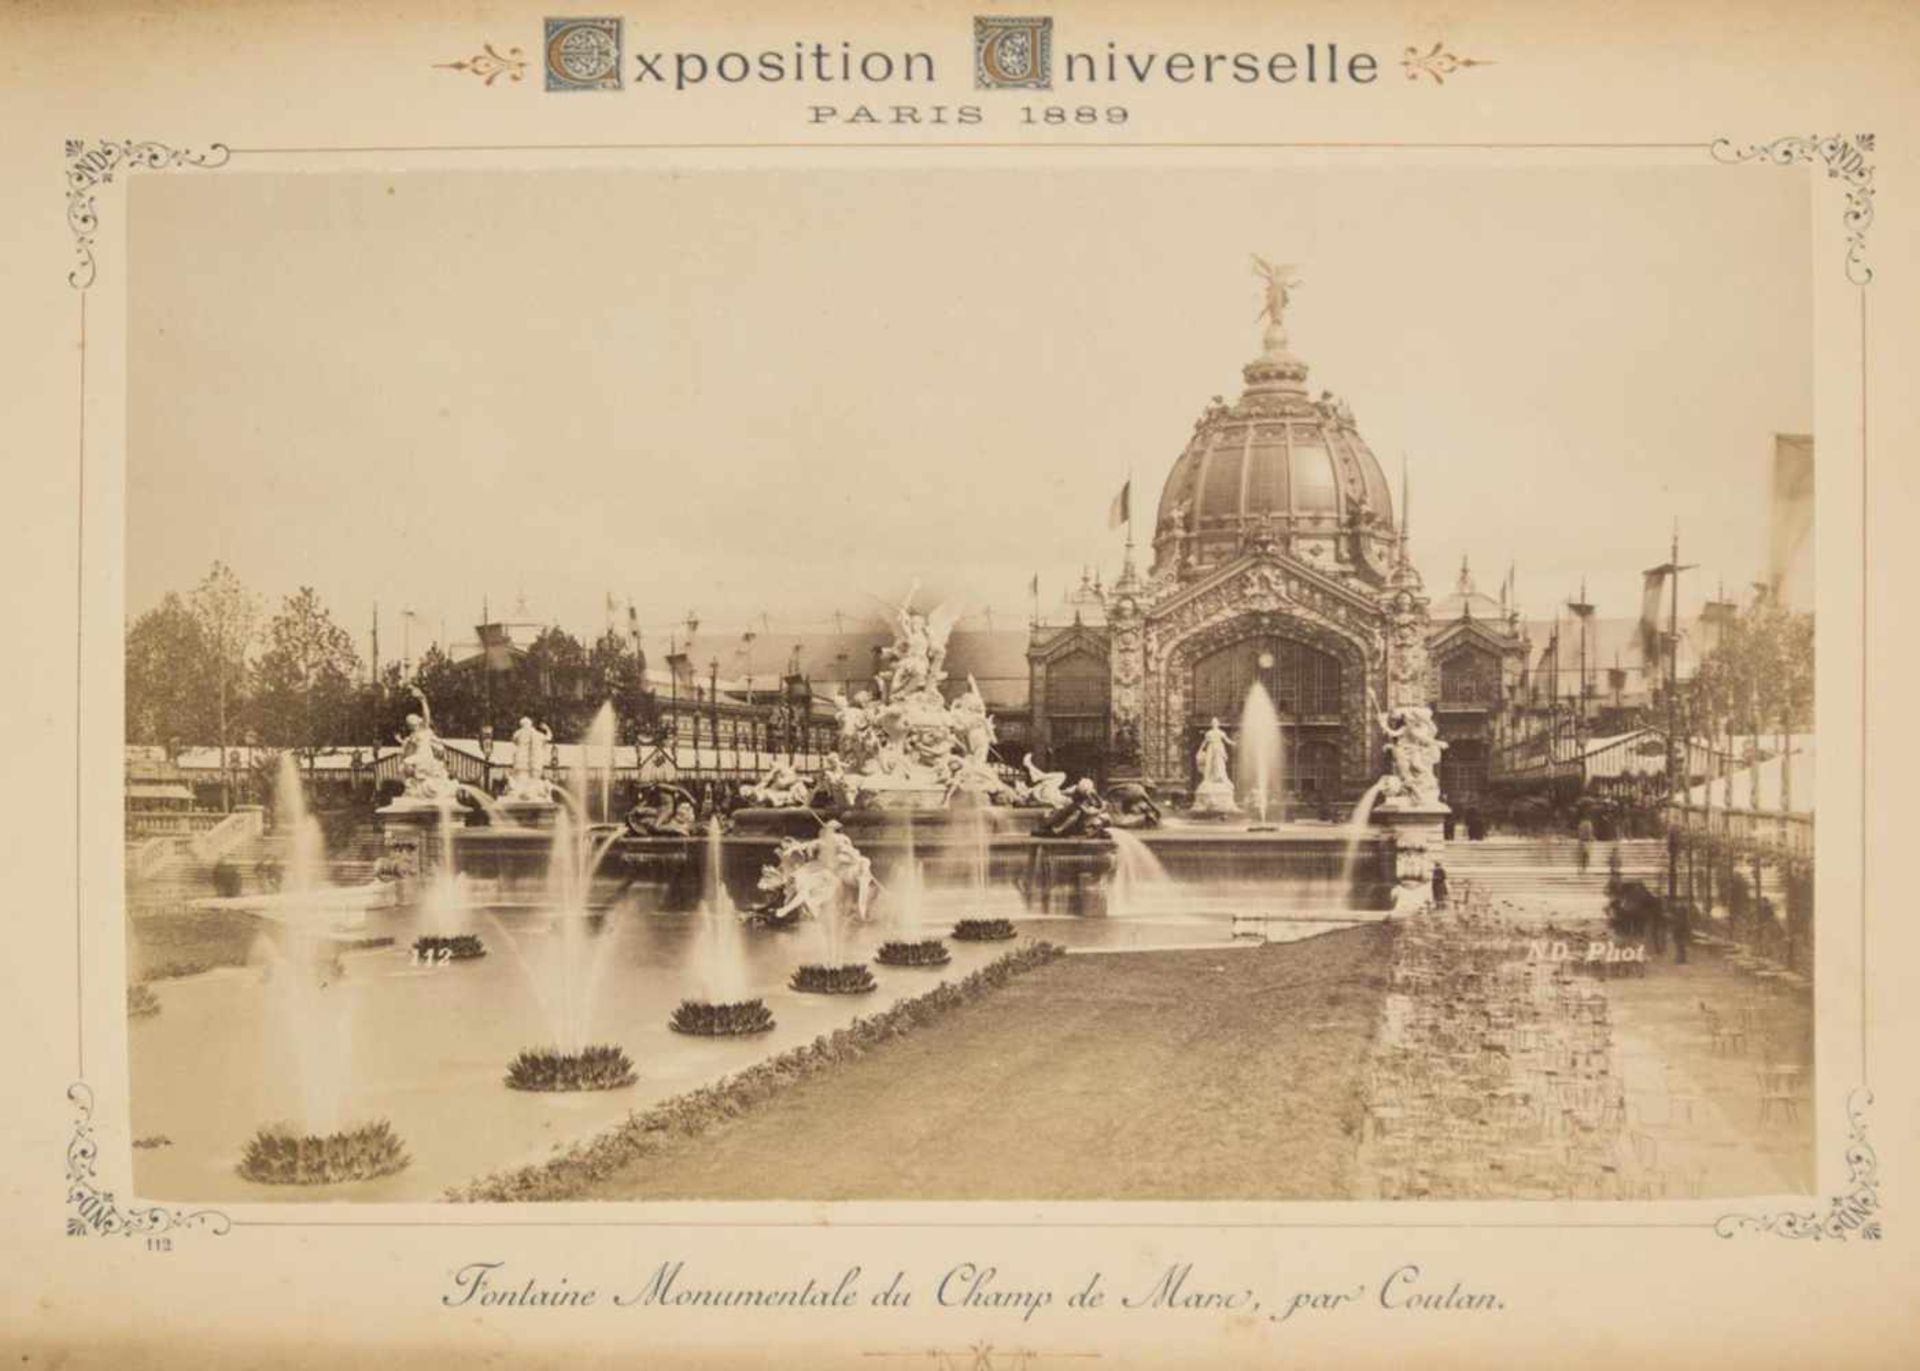 Exposition Universelle. 1889. Paris. 27x18,5 cm. France. In the composite cover with gold lettering. - Bild 7 aus 9